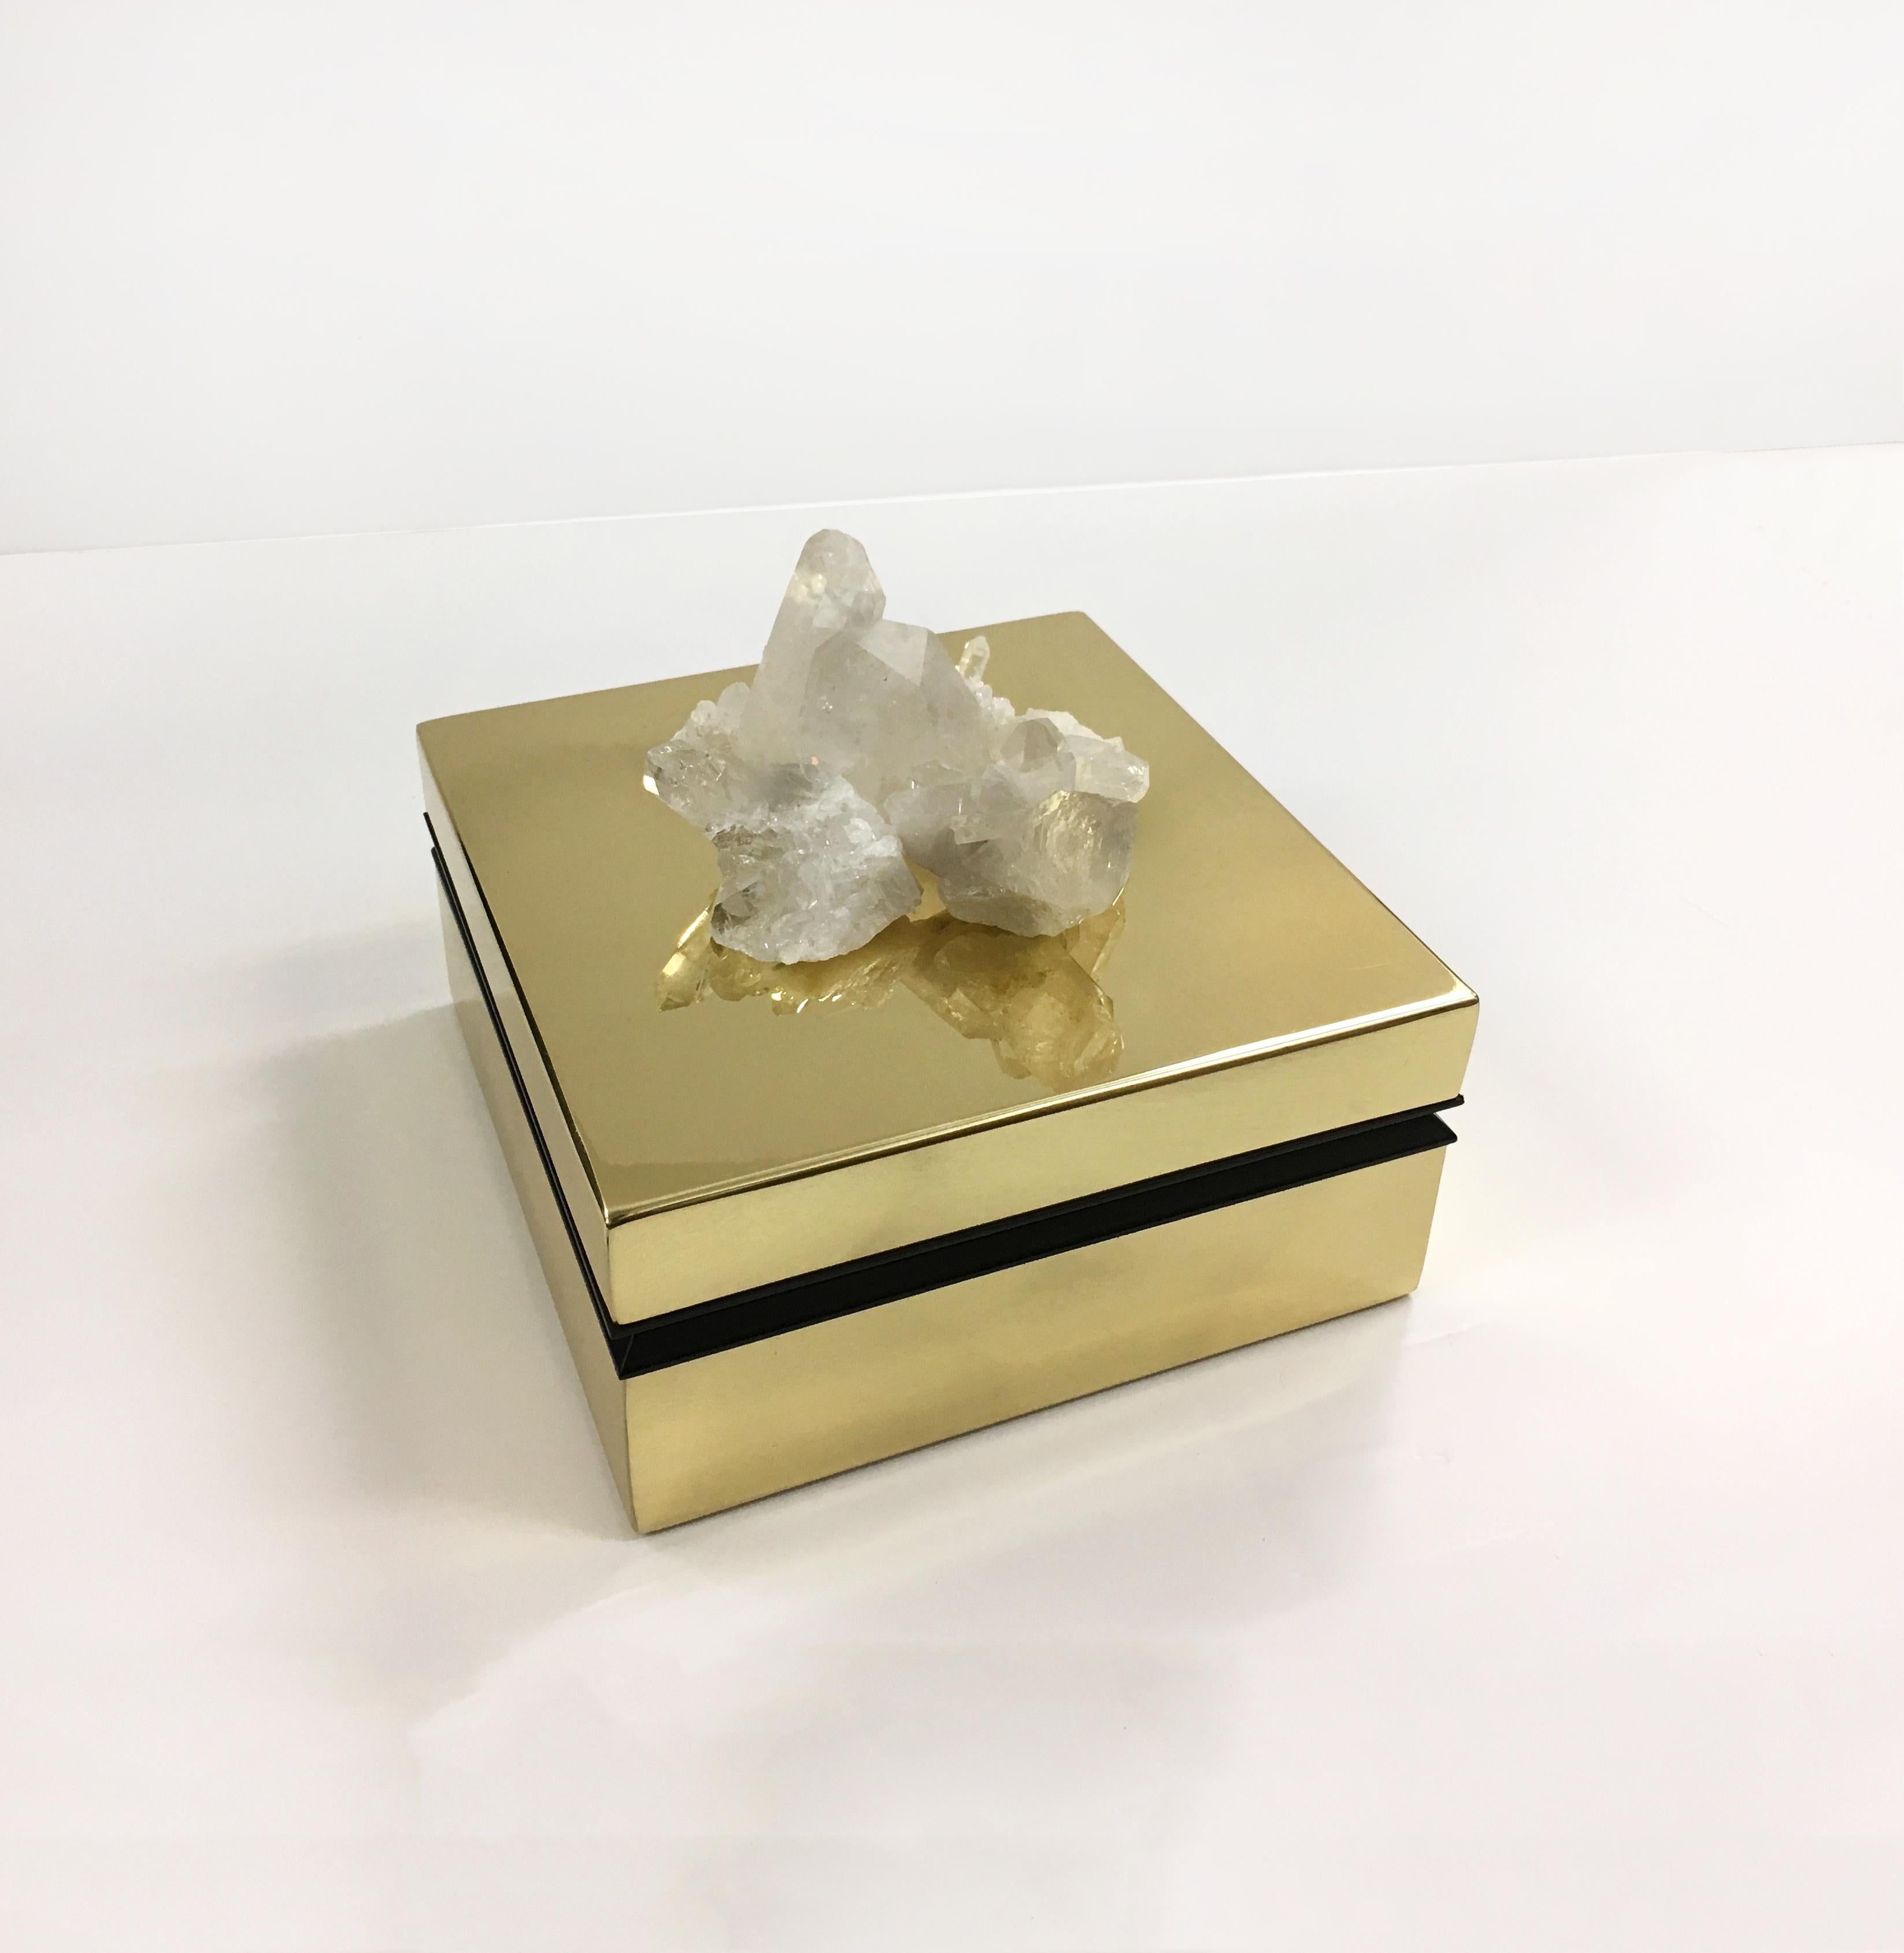 Stunning brass and stone jewel box by Umberto Cinelli, Italy, 2018. 

This awesome piece is handcrafted by our Italian artisans and each is one-of-a-kind due to the natural semi-precious stones and minerals used. 
A statement piece that will